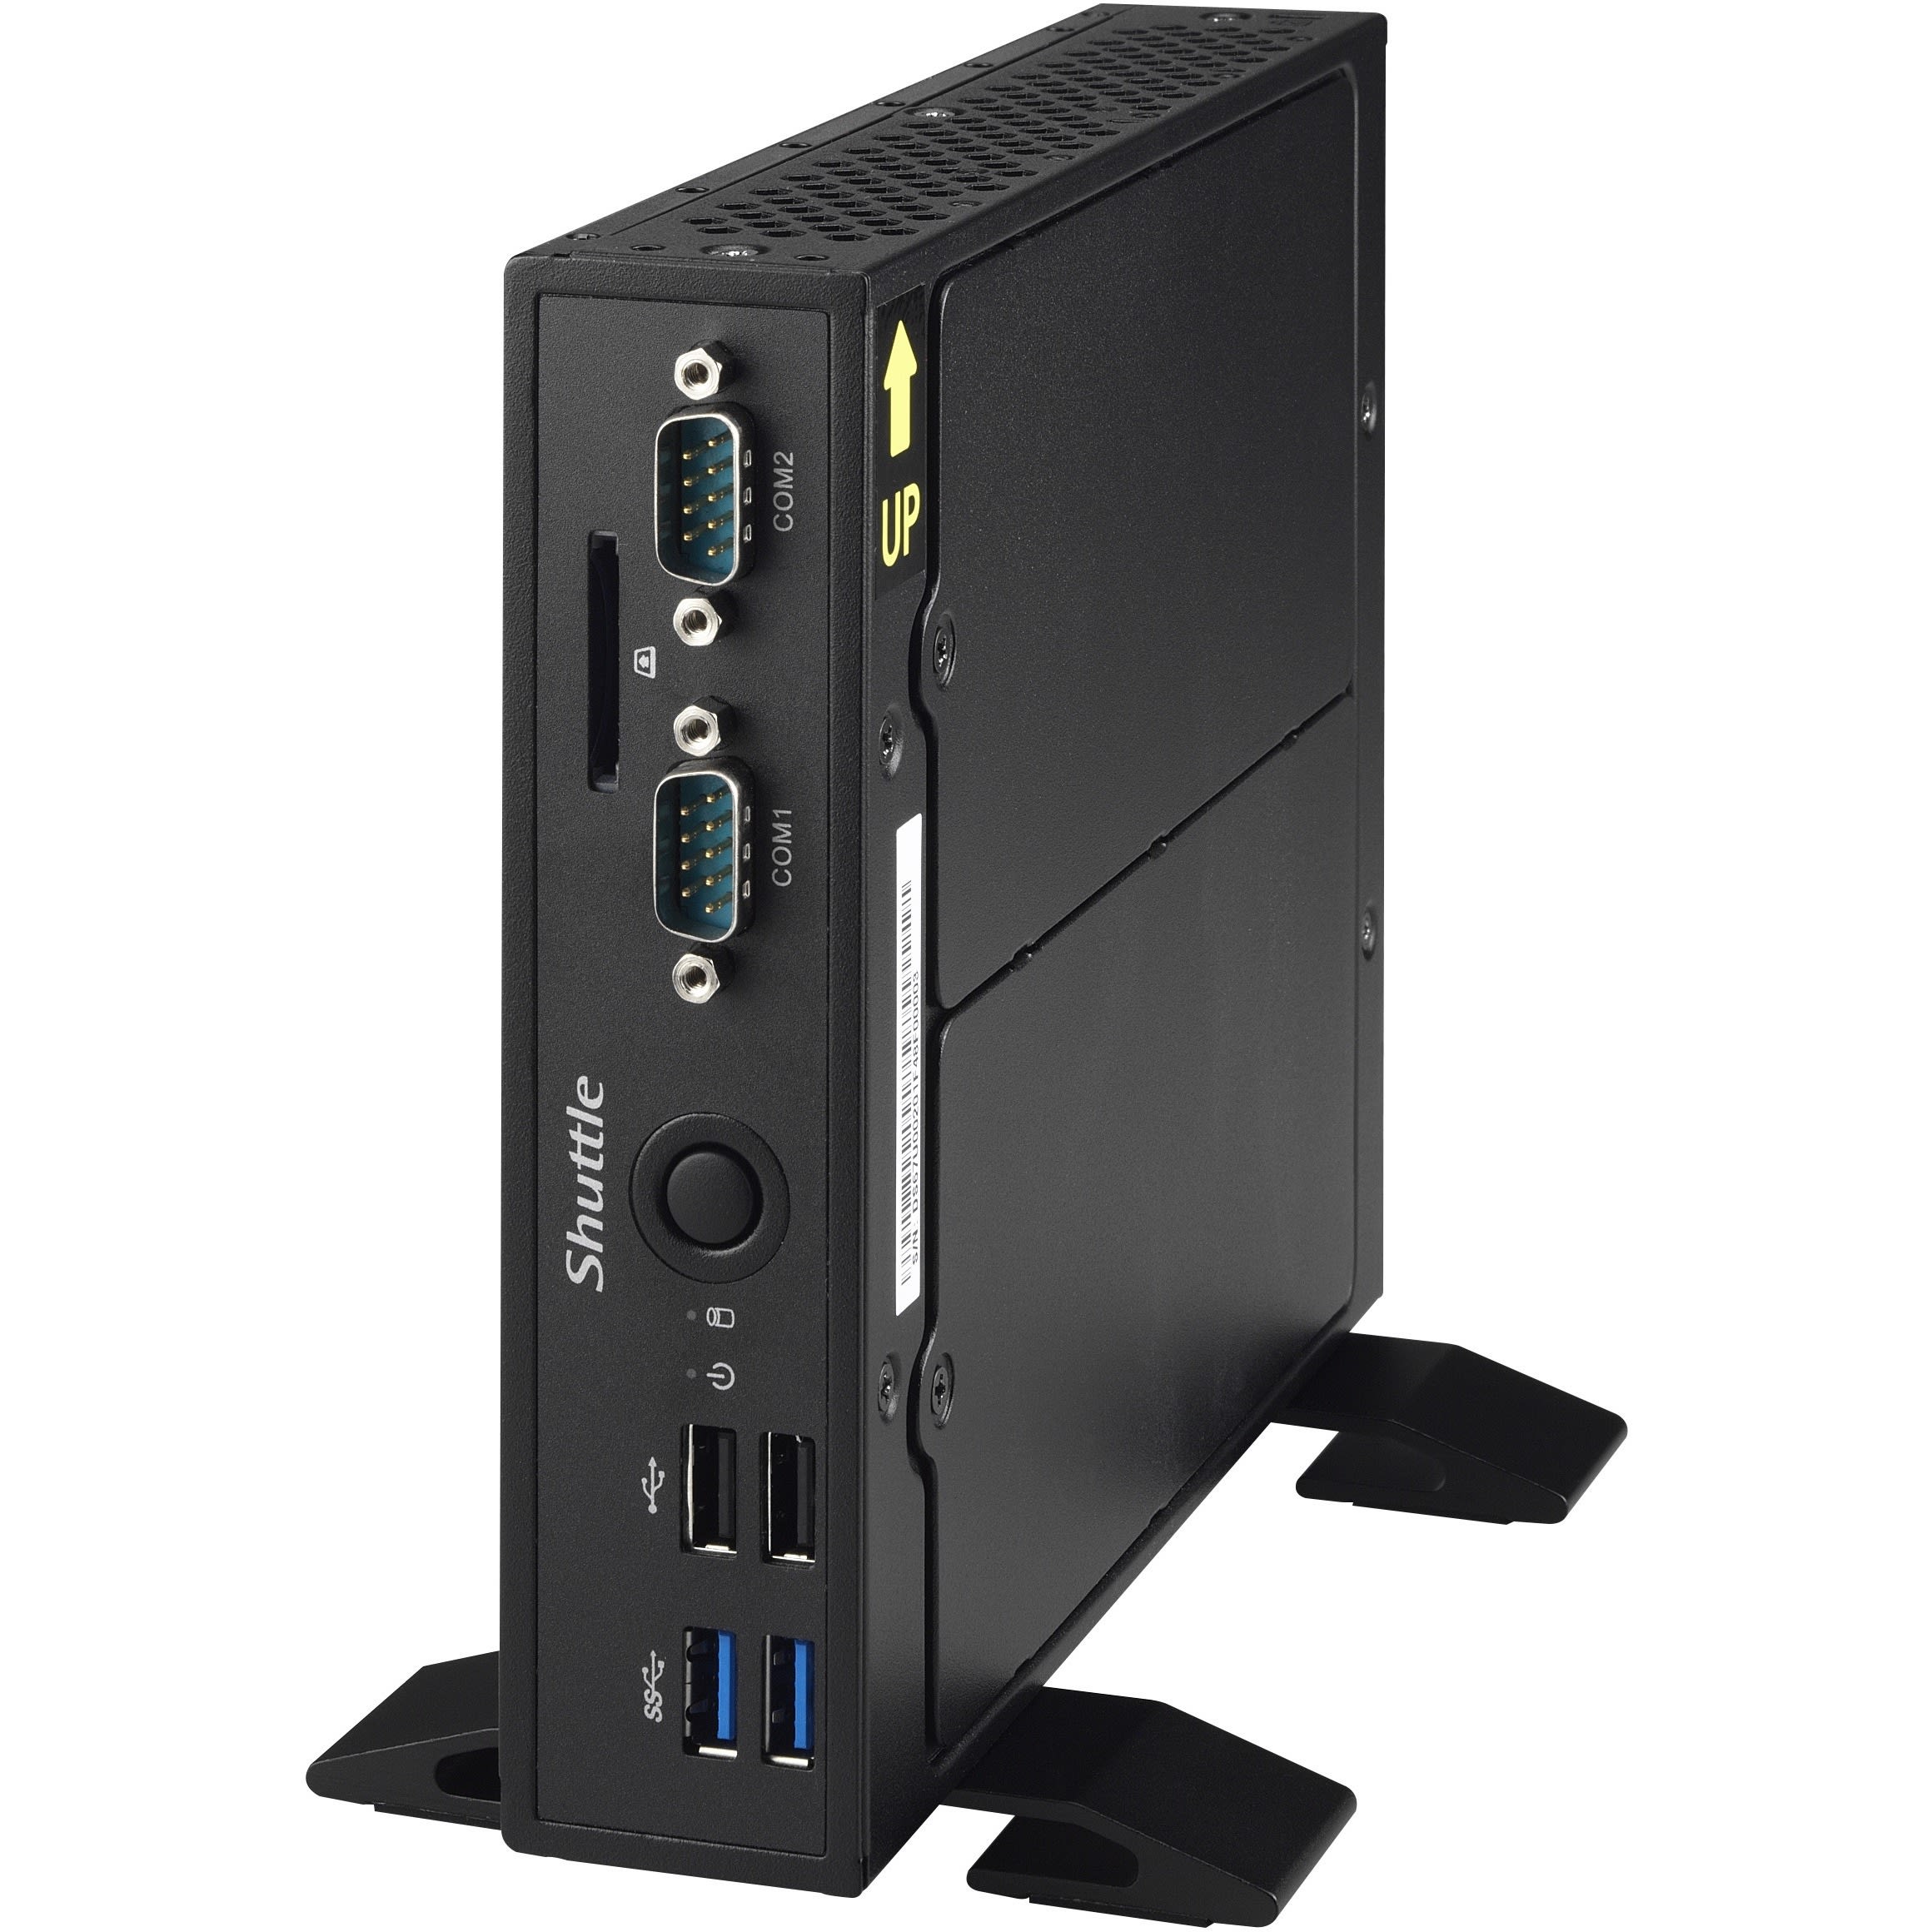 For Delivery Desktop Computers - ODP Business Solutions, ODP 